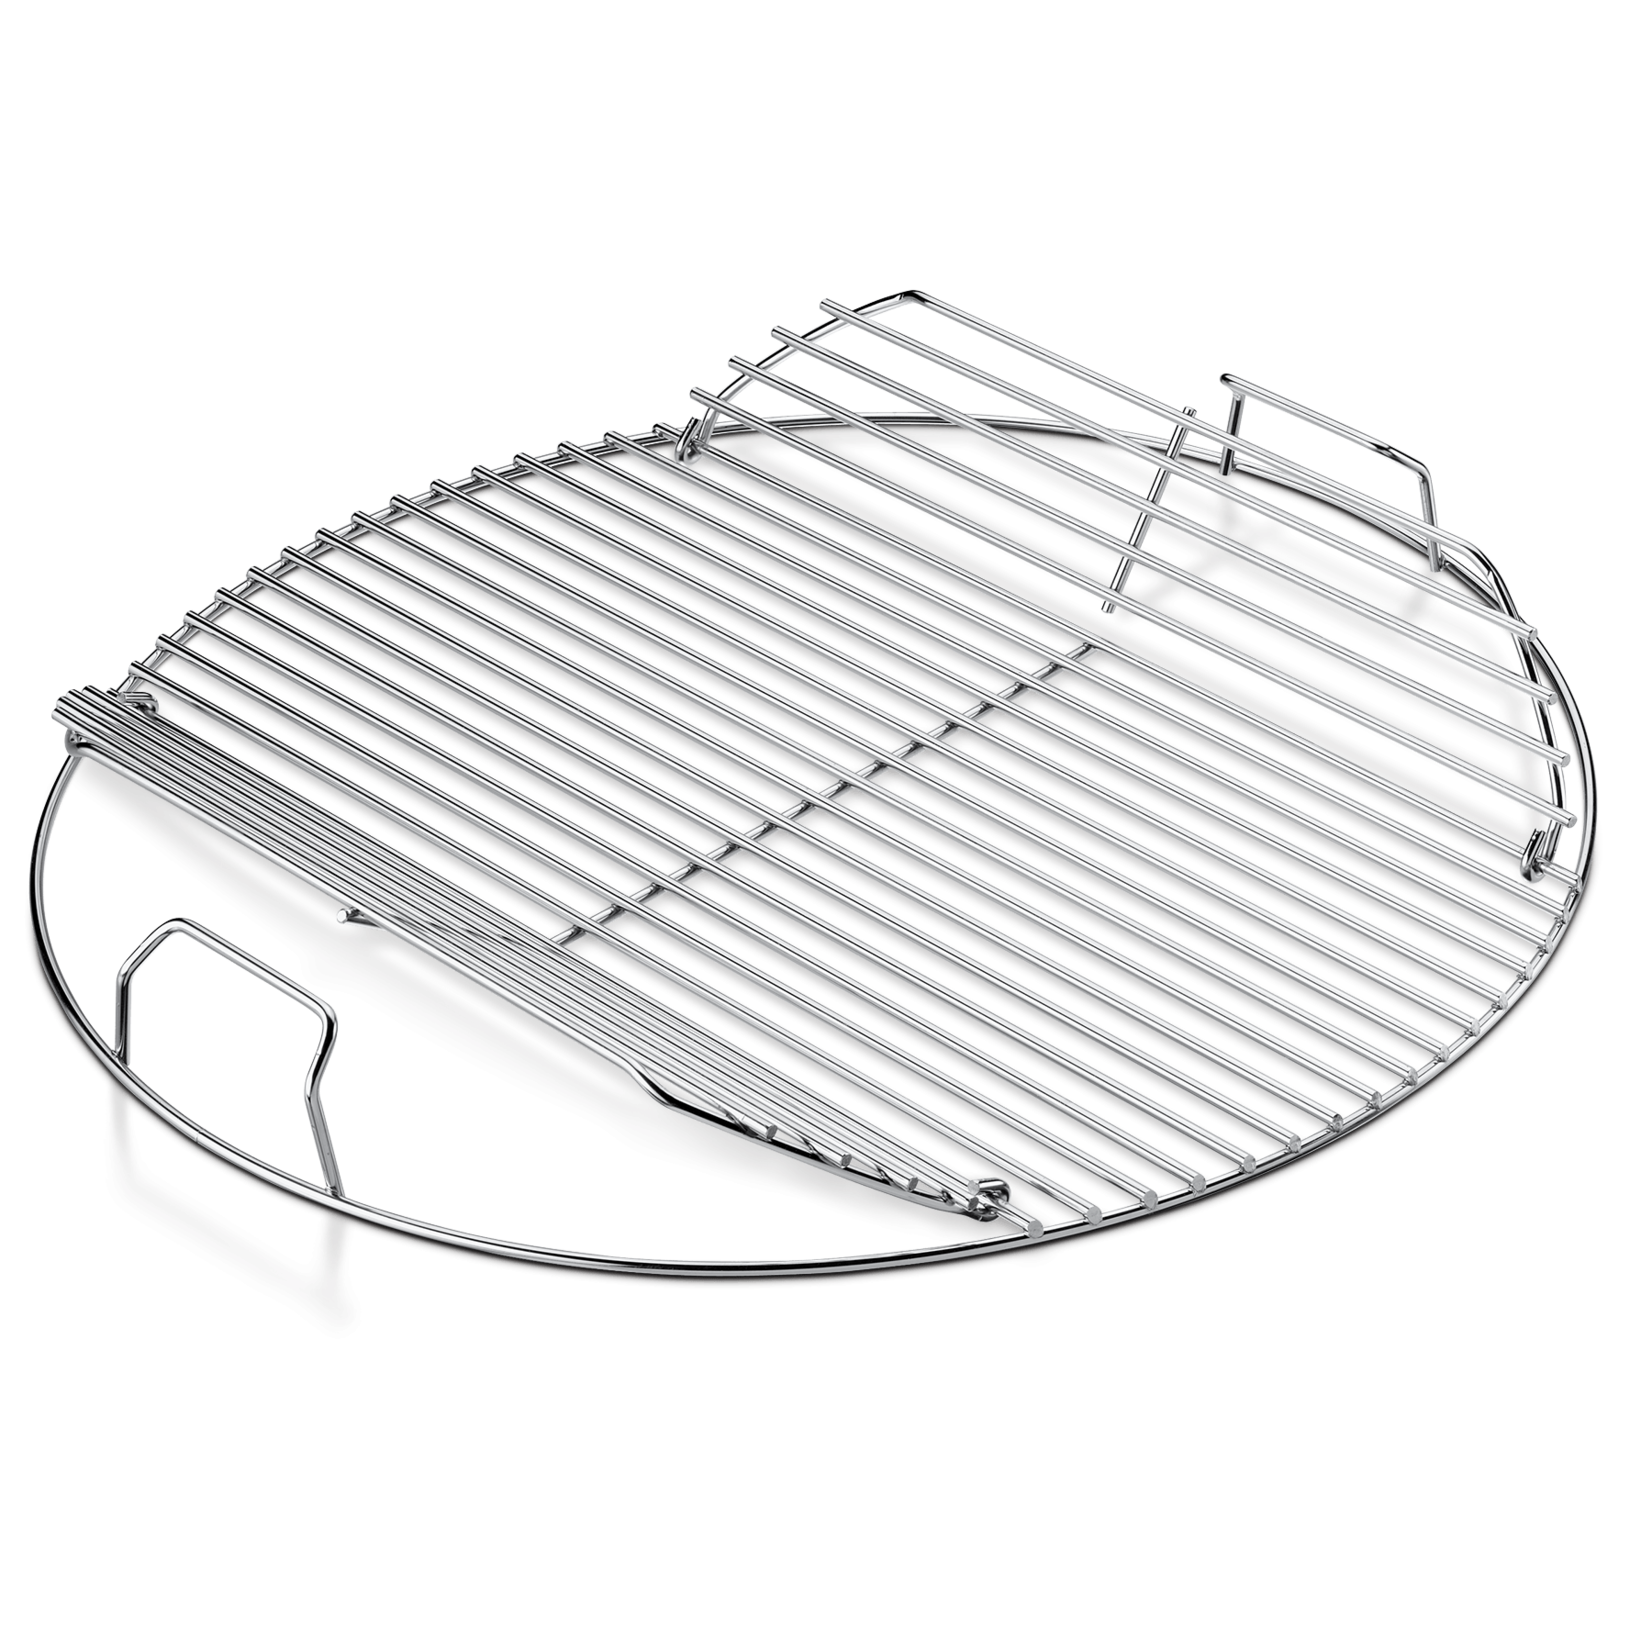 Weber Hinged Cooking Grate - Fits 18" (not Smokey Mountain Cooker Smoker)